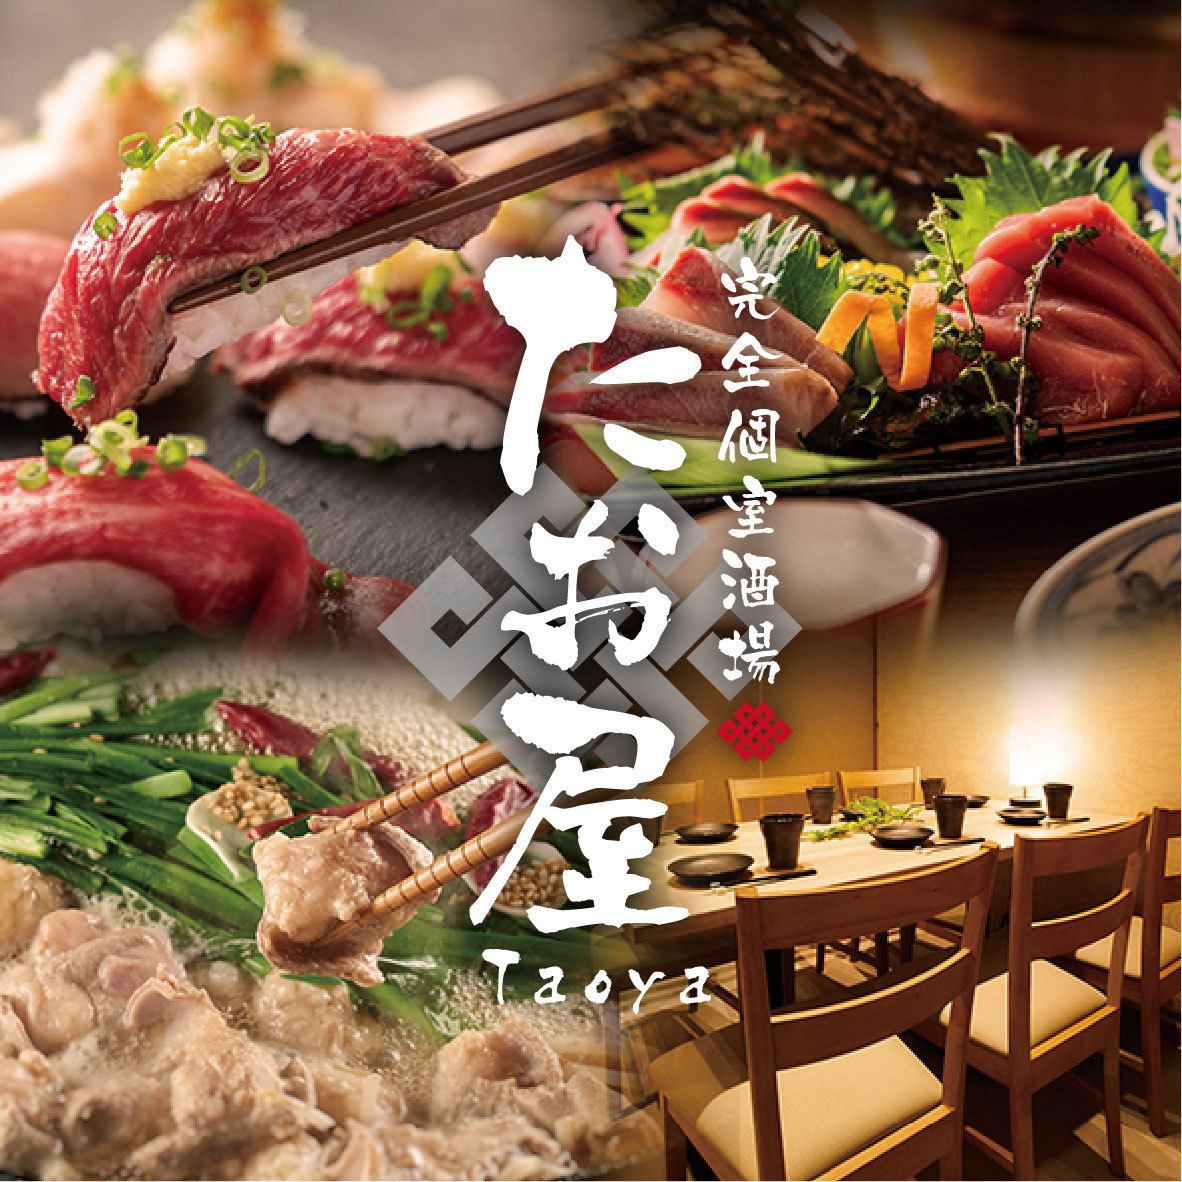 All-you-can-eat and drink in private rooms starting from 2,700 yen! Lowest price in the area